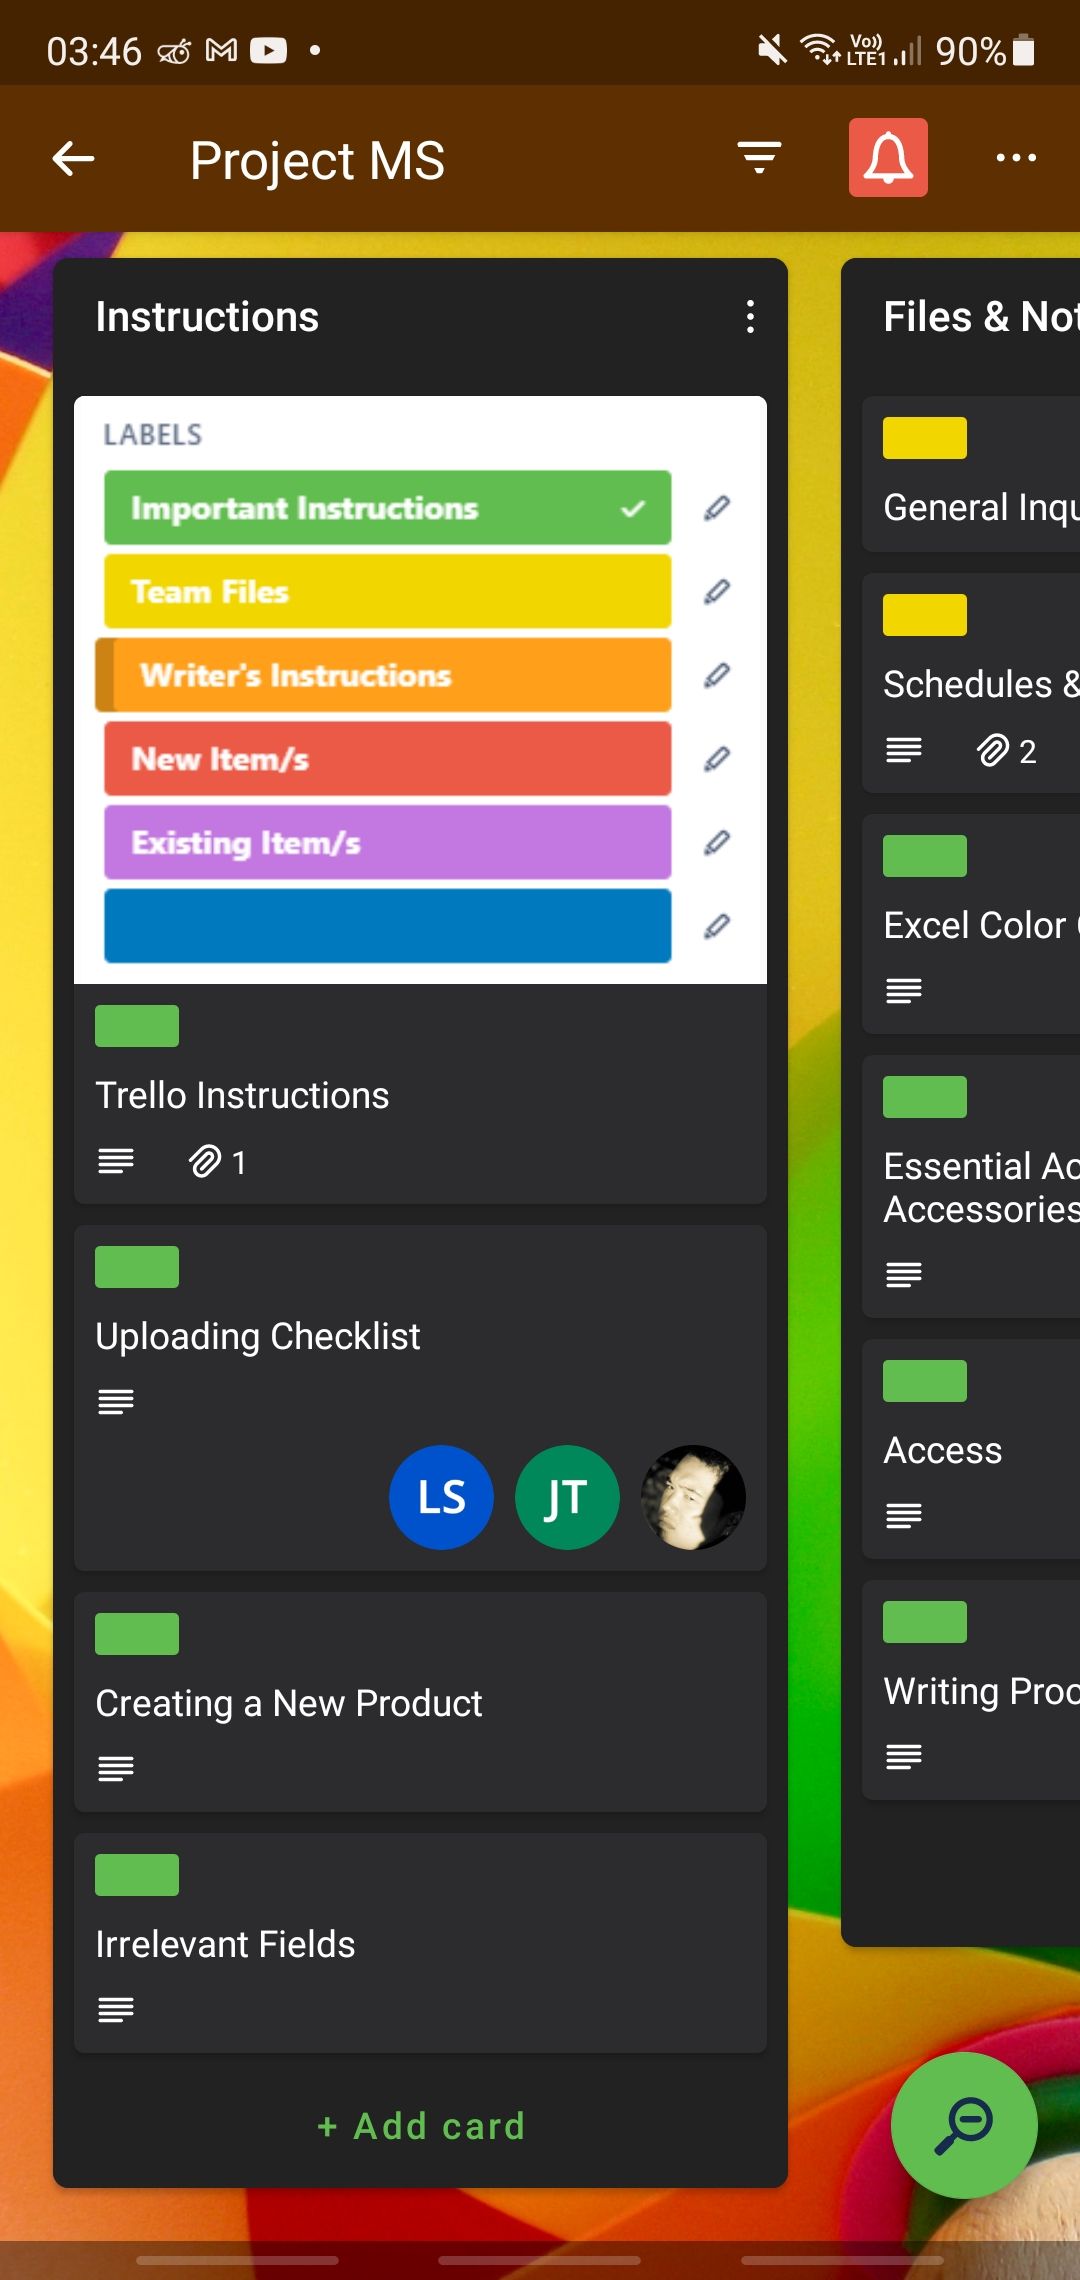 Cards and Lists on Trello, as seen on the Android app